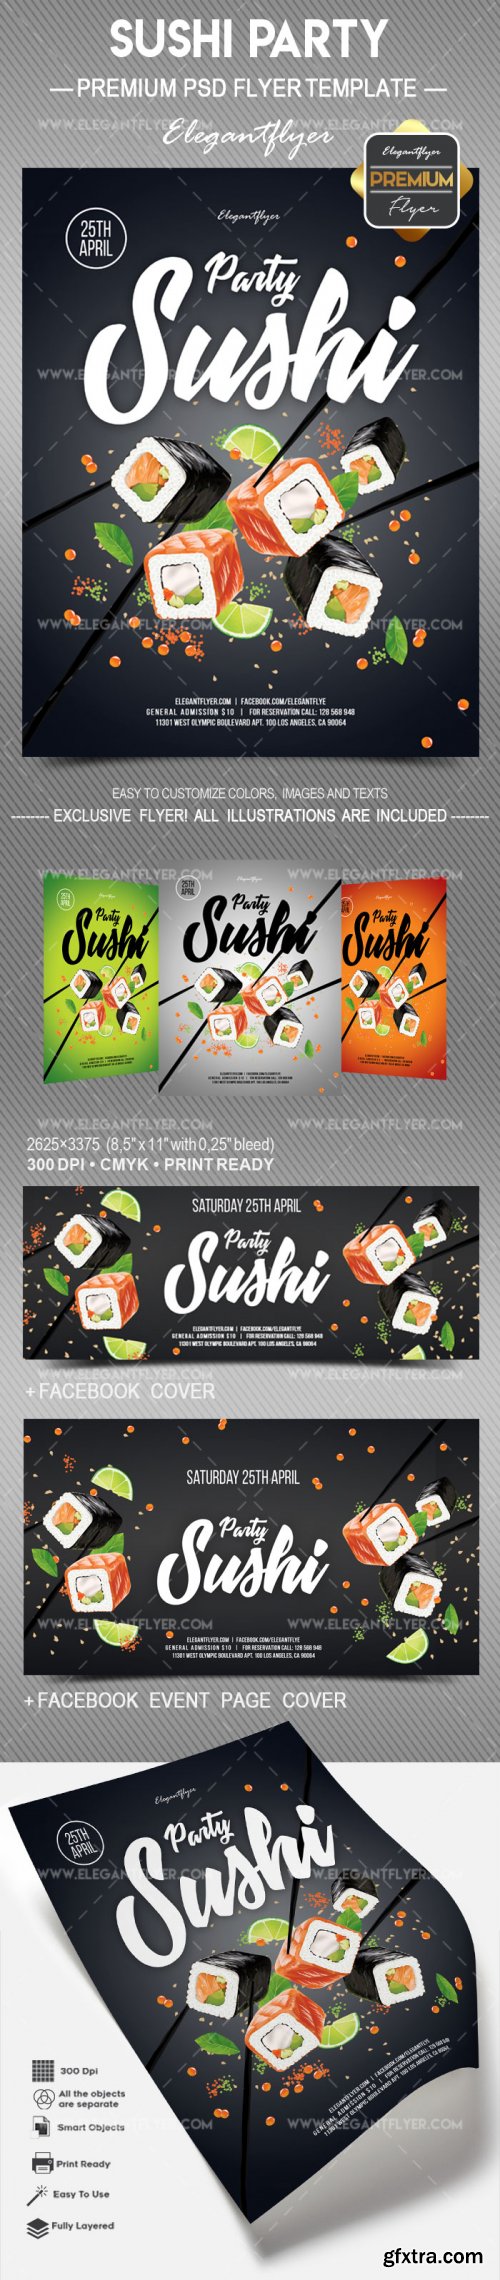 Sushi Party V1 2018 Flyer PSD Template + Facebook Cover